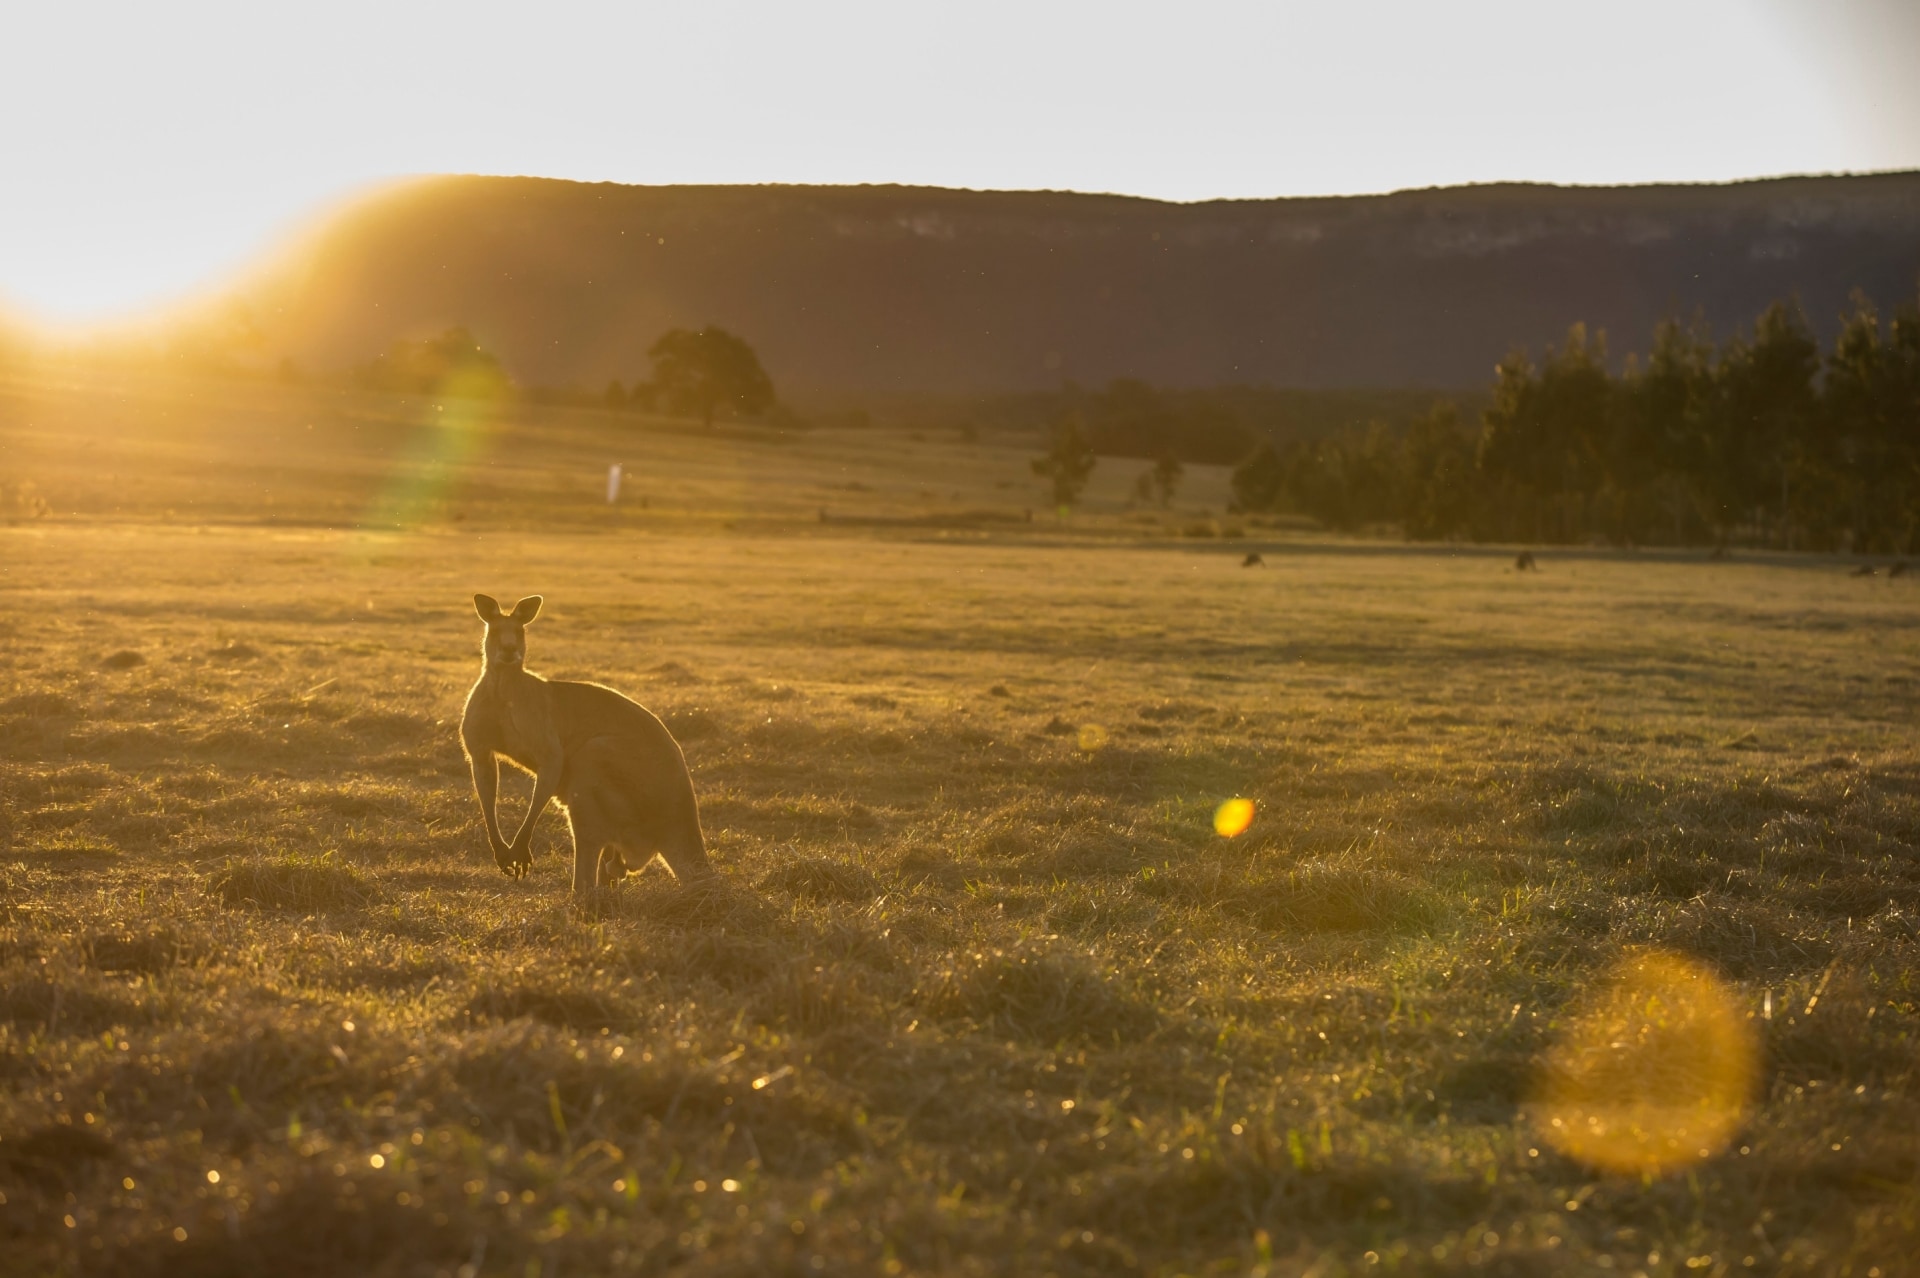 Emirates One&Only Wolgan Valley, Wolgan Valley, New South Wales © Destination NSW